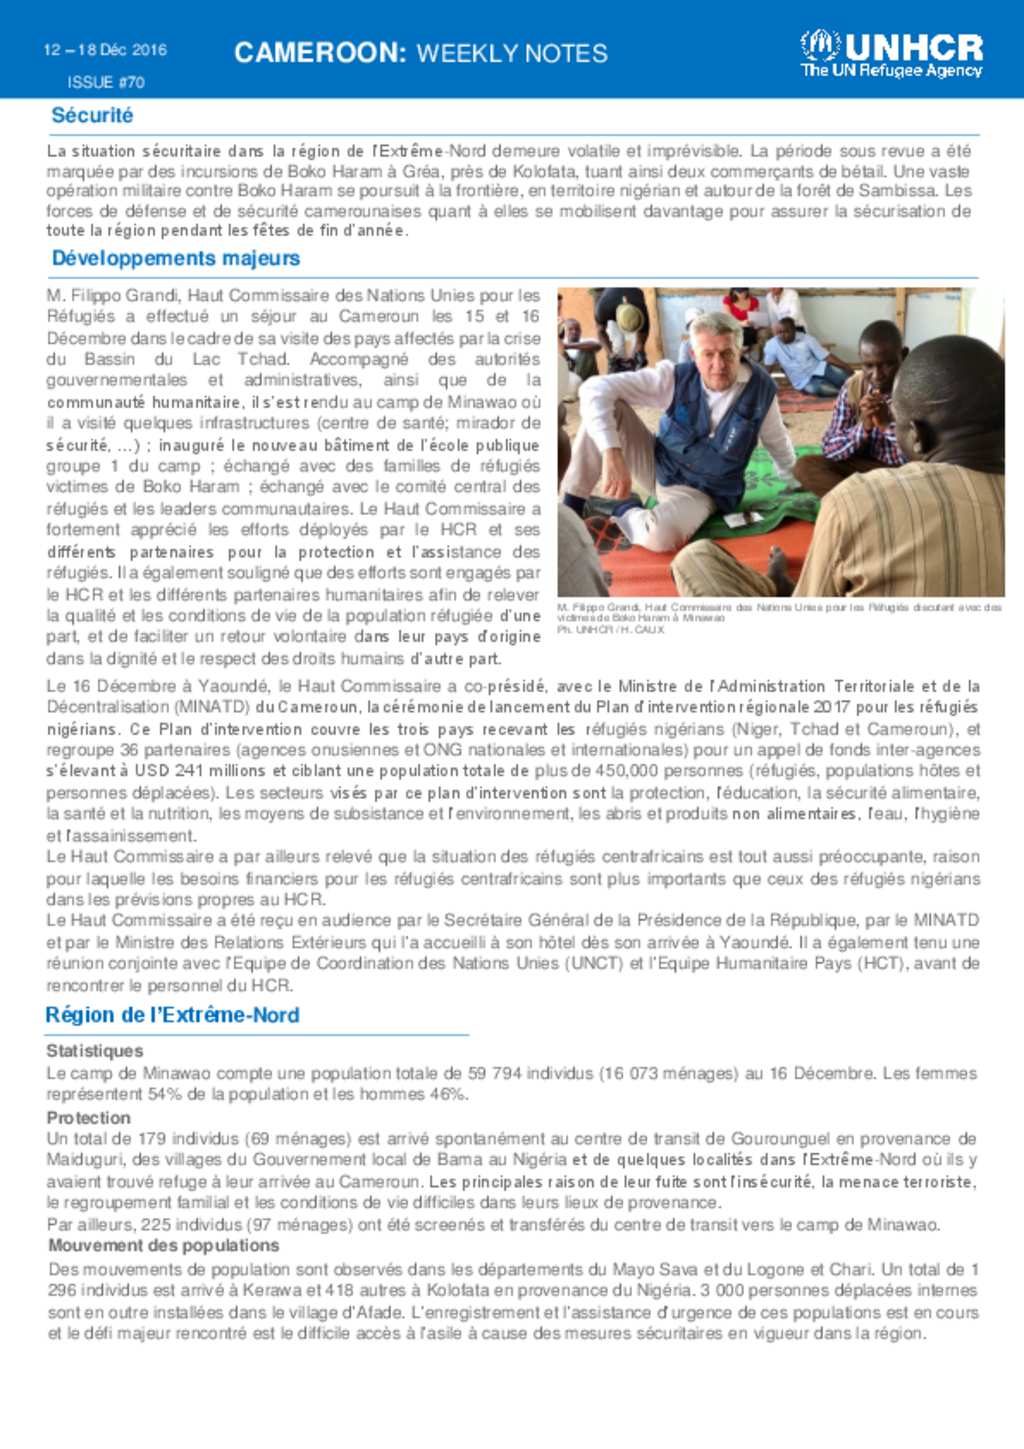 Document - Cameroon Weekly notes #70, 12-18 December 2016